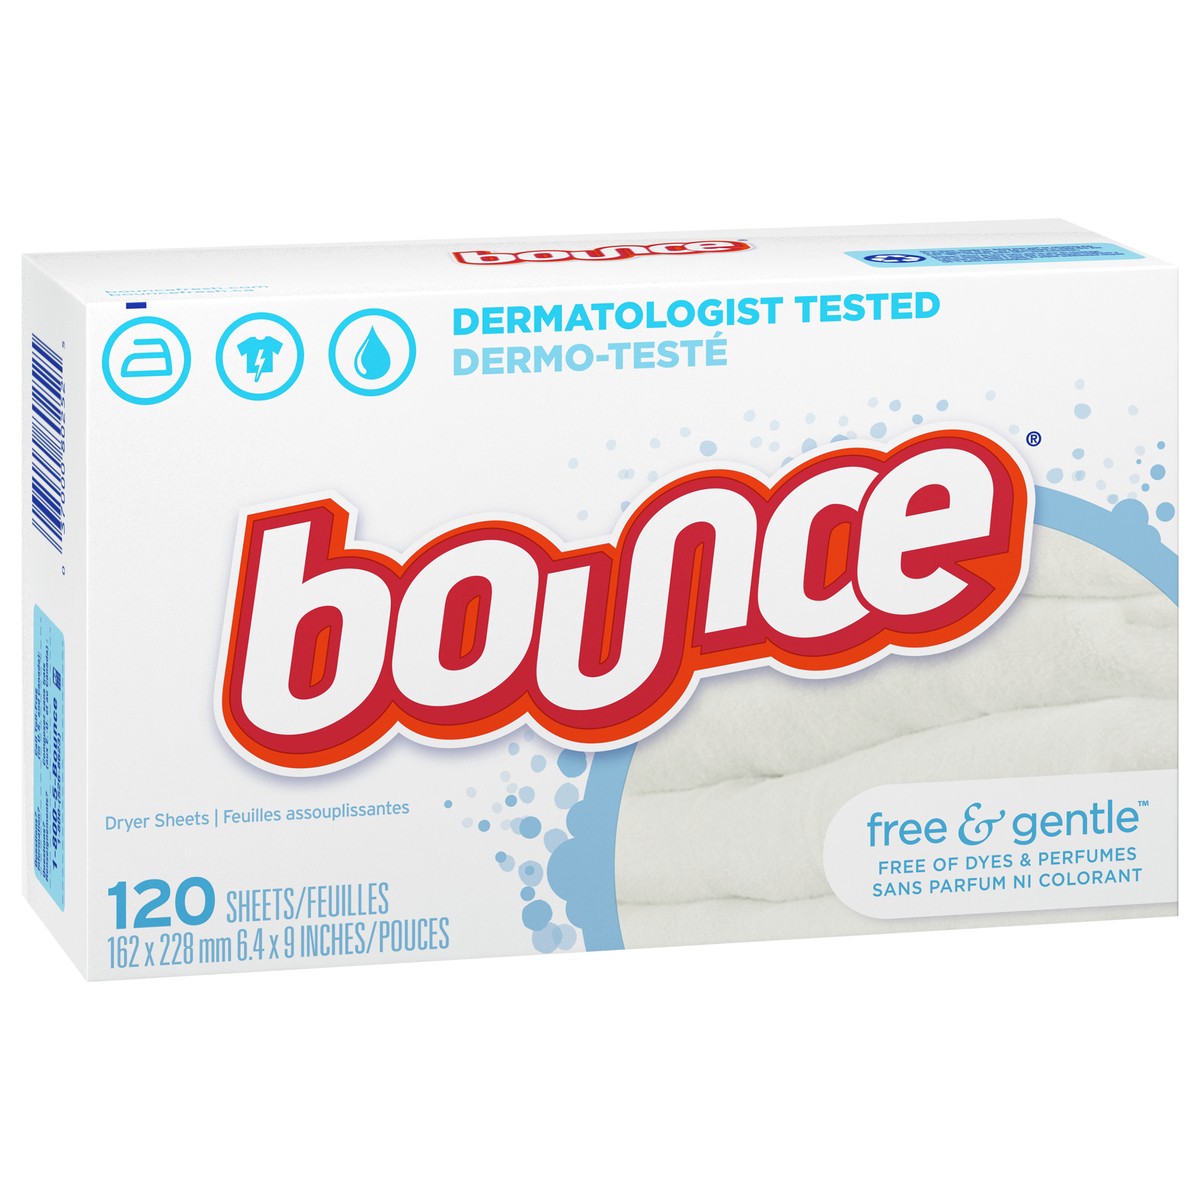 slide 6 of 9, Bounce Free & Gentle Dryer Sheets, 120 Sheets, Unscented Fabric Softener Sheets, Hypoallergenic and Dermatologist Tested, 120 ct